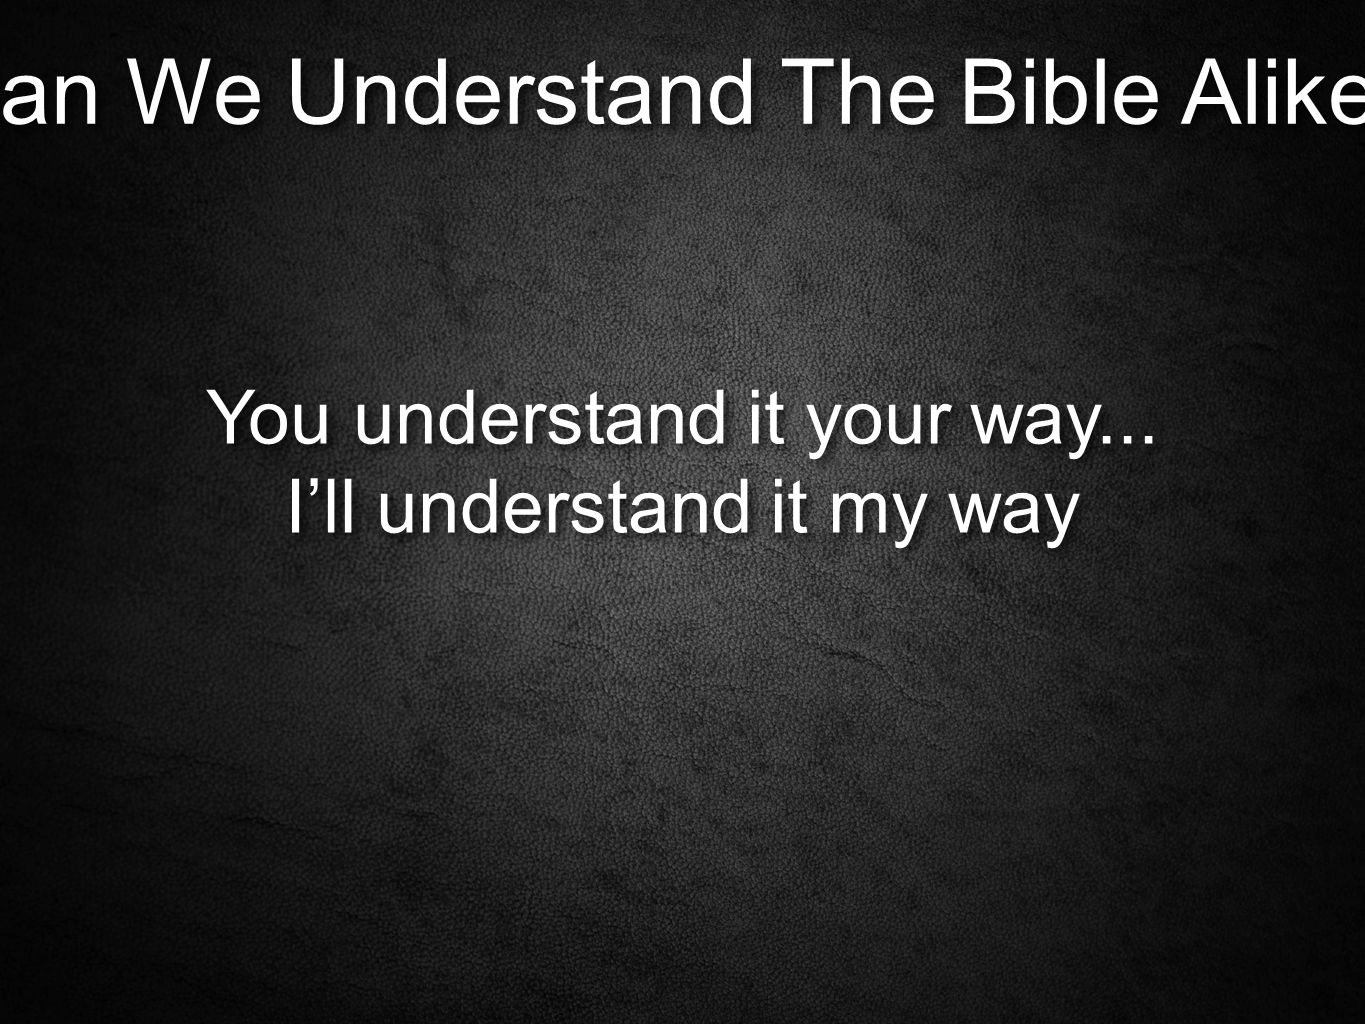 Can We Understand The Bible Alike. You understand it your way...